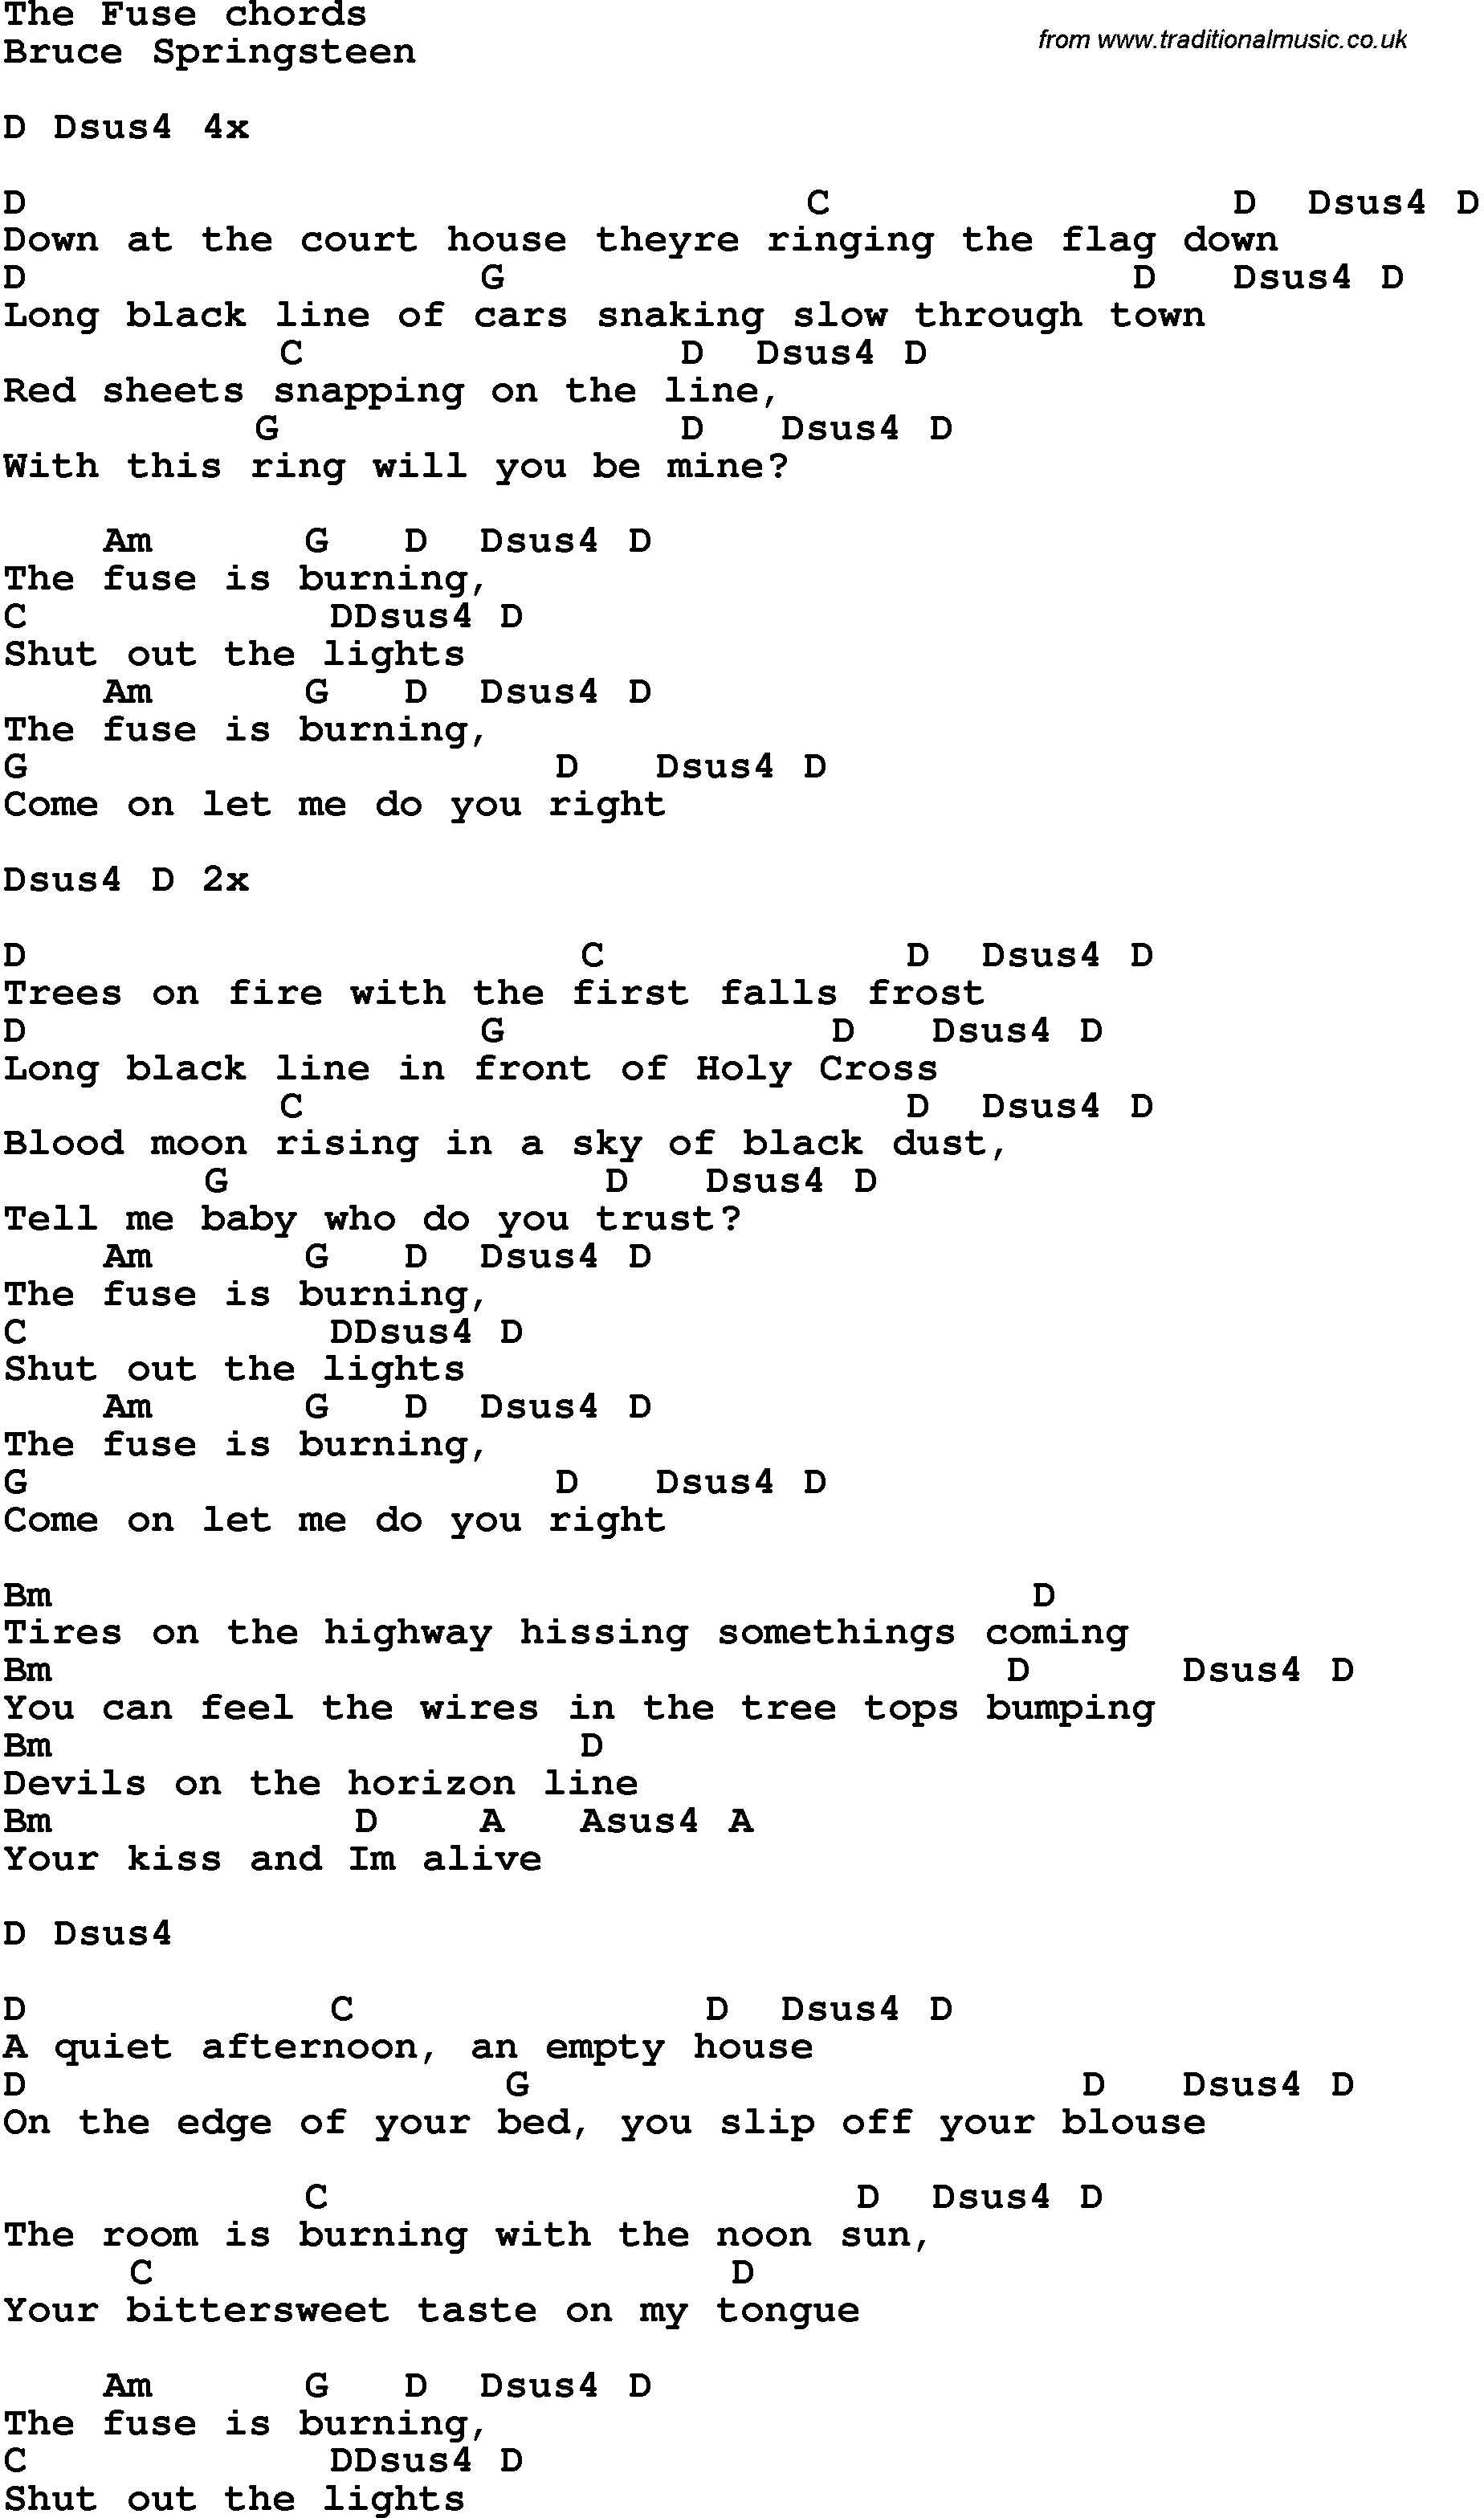 Song Lyrics with guitar chords for The Fuse - Bruce Springsteen